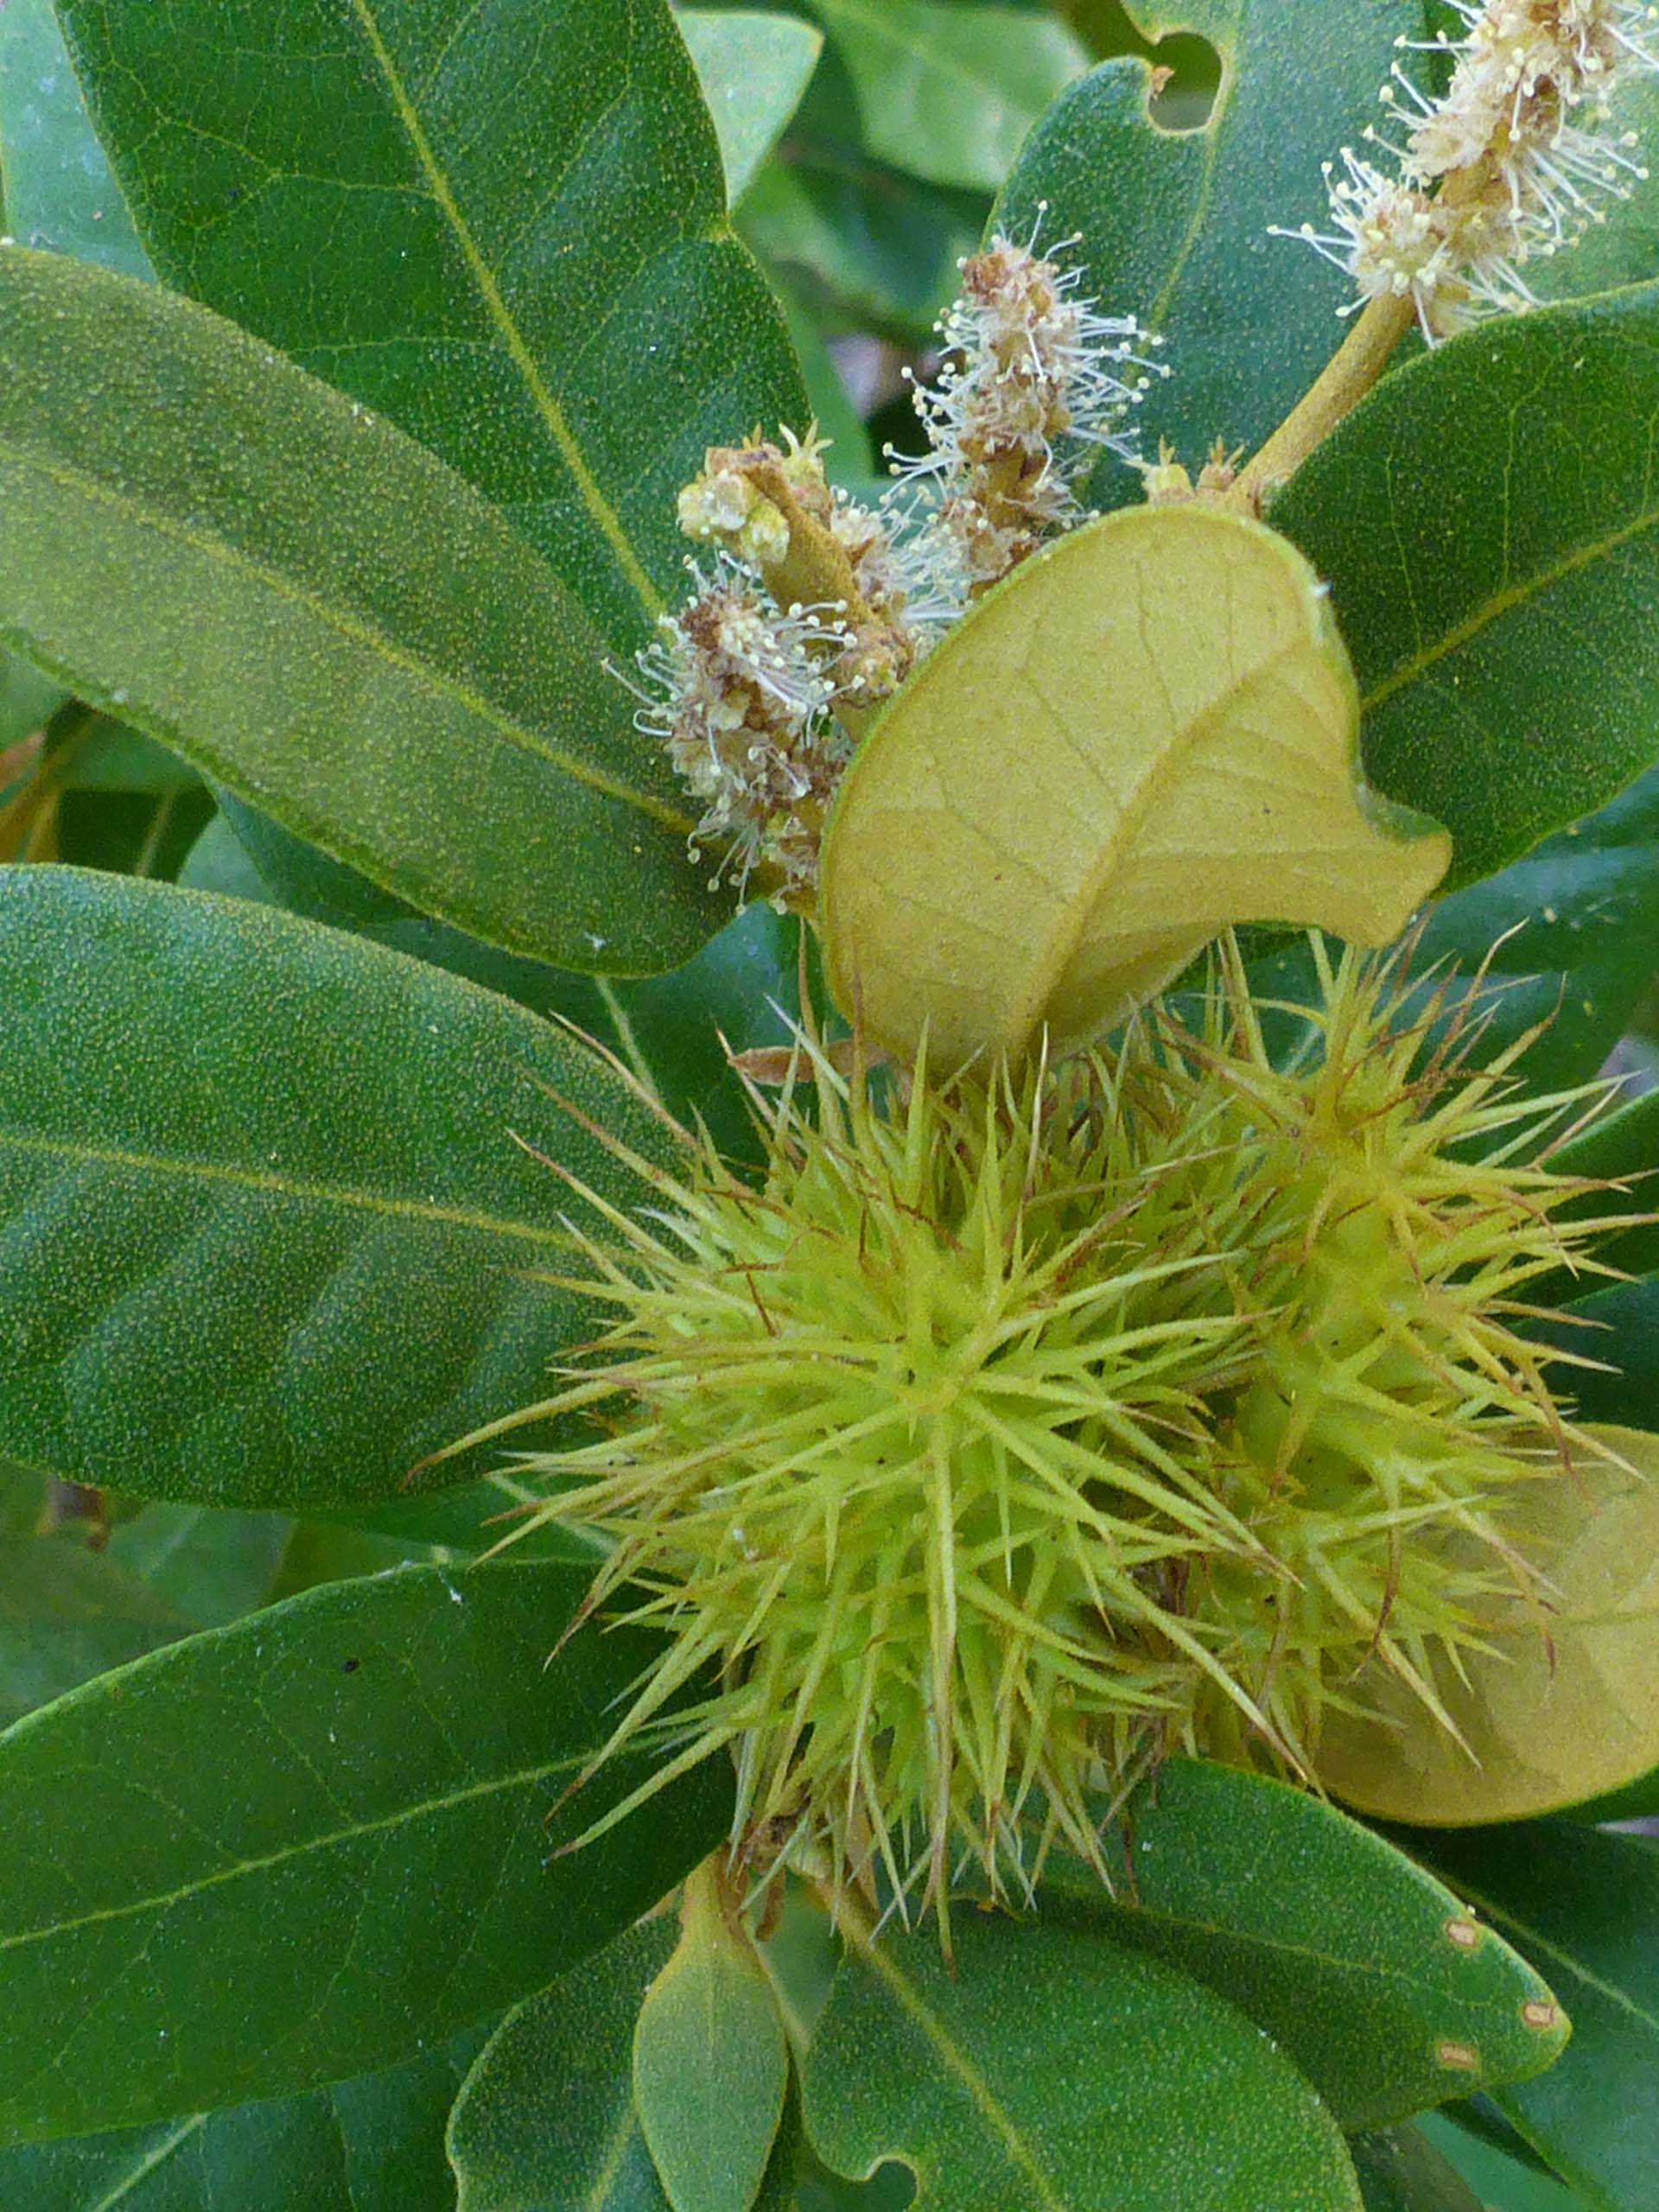 Bush chinquapin spiny fruit, flowers, and golden leaf underside. D. Burk.